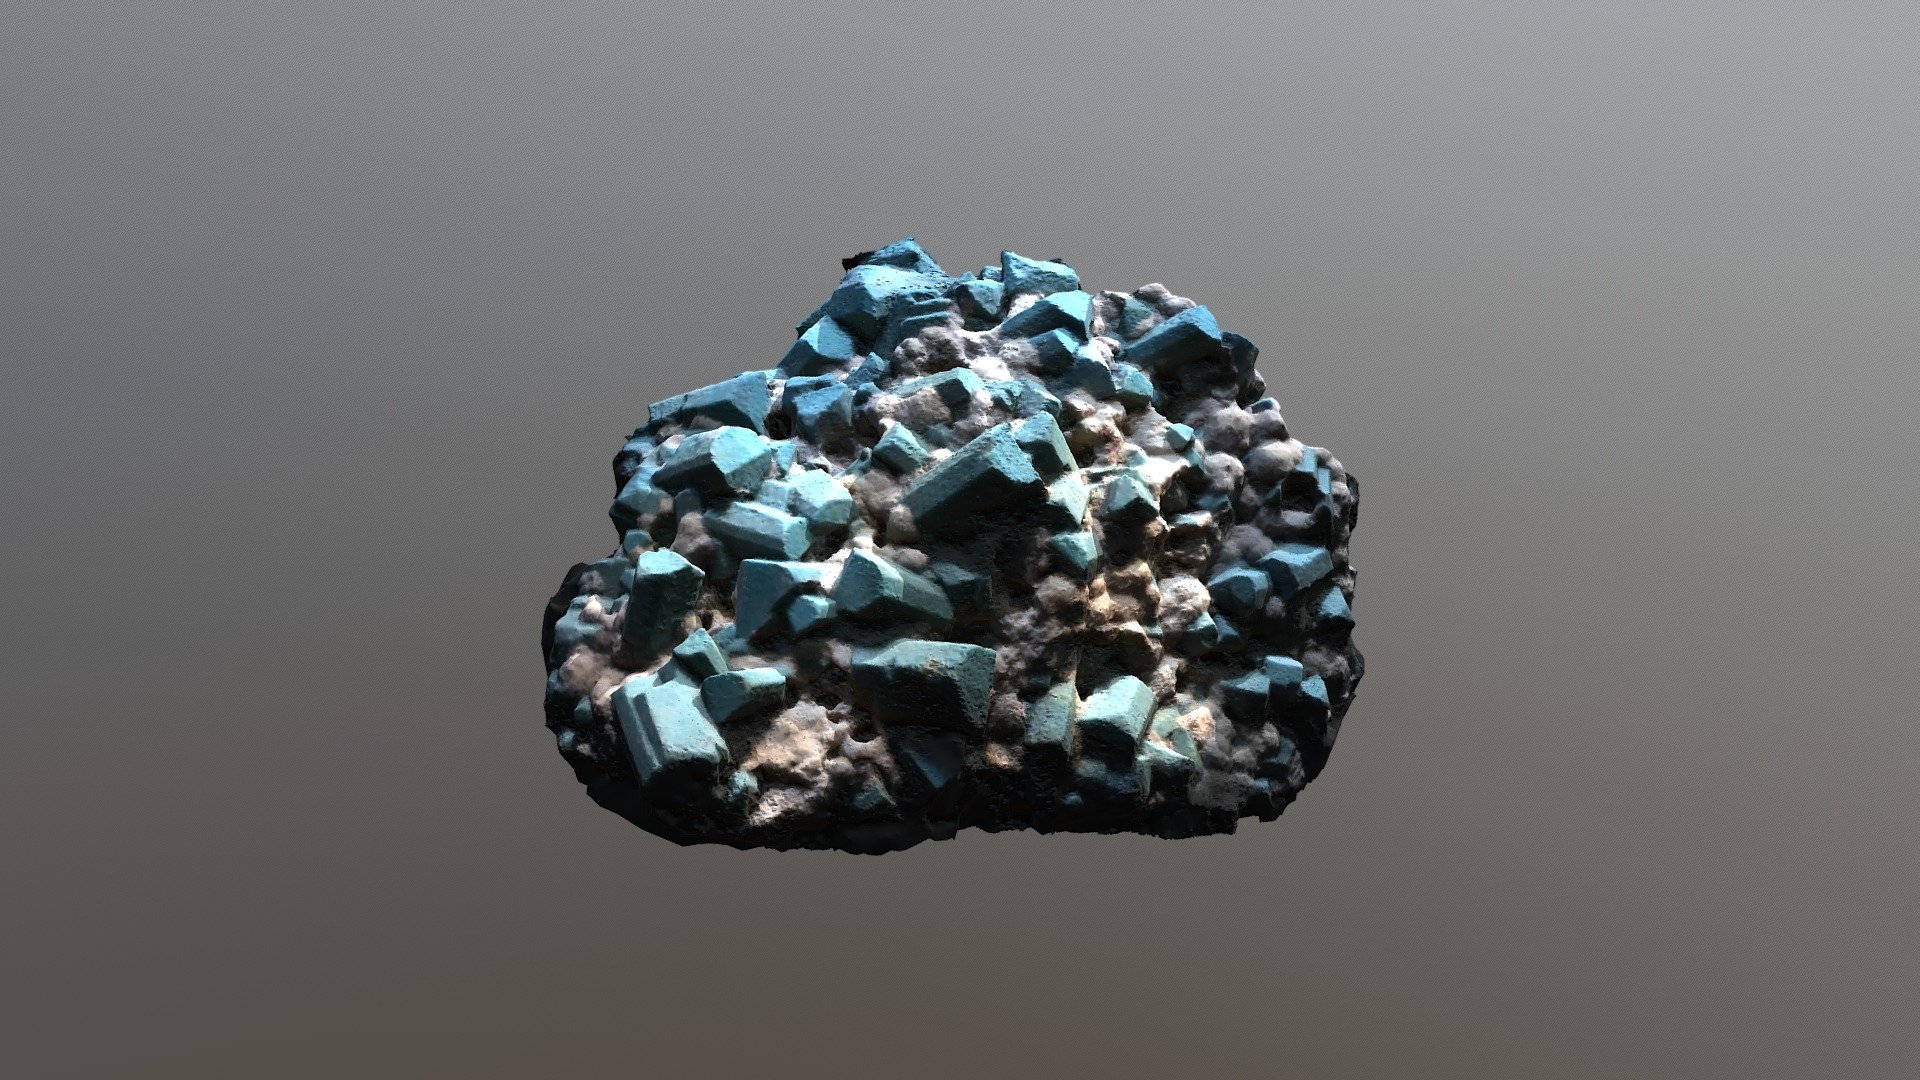 Turquoise Rock formation crystals photogrammetry